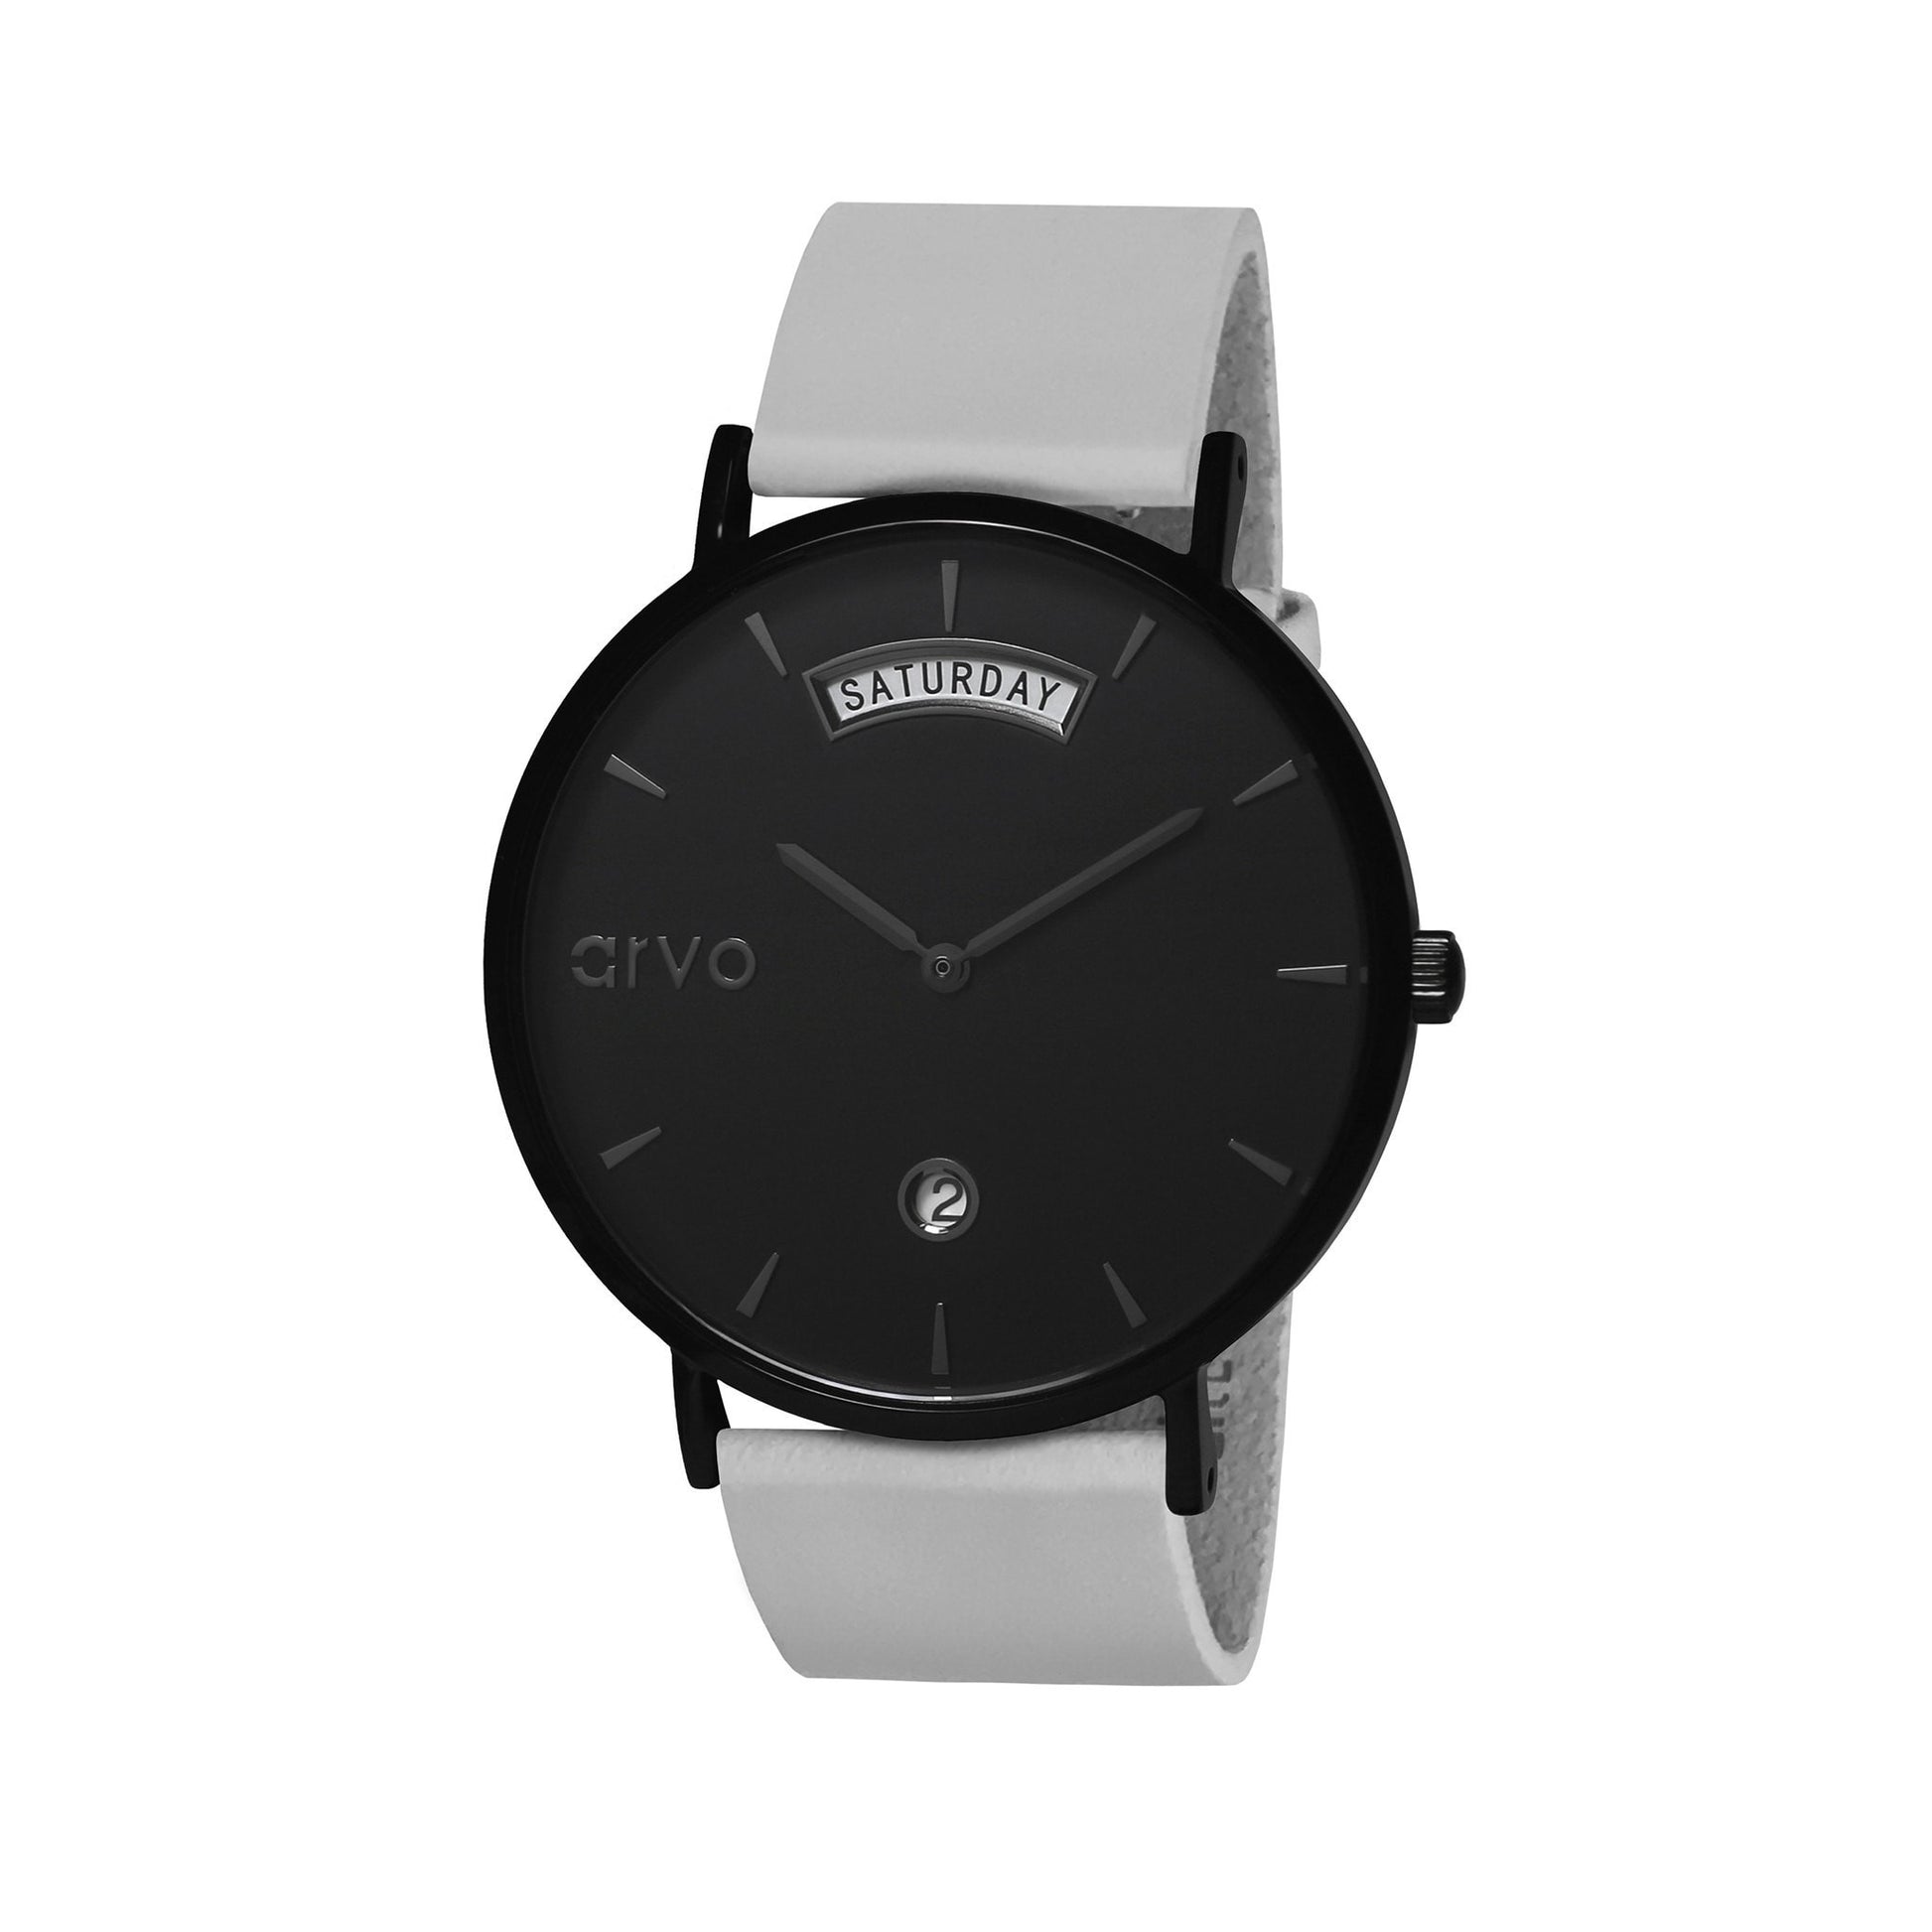 36mm Arvo Black Awristacrat Watch with black dial black case and gray leather band case